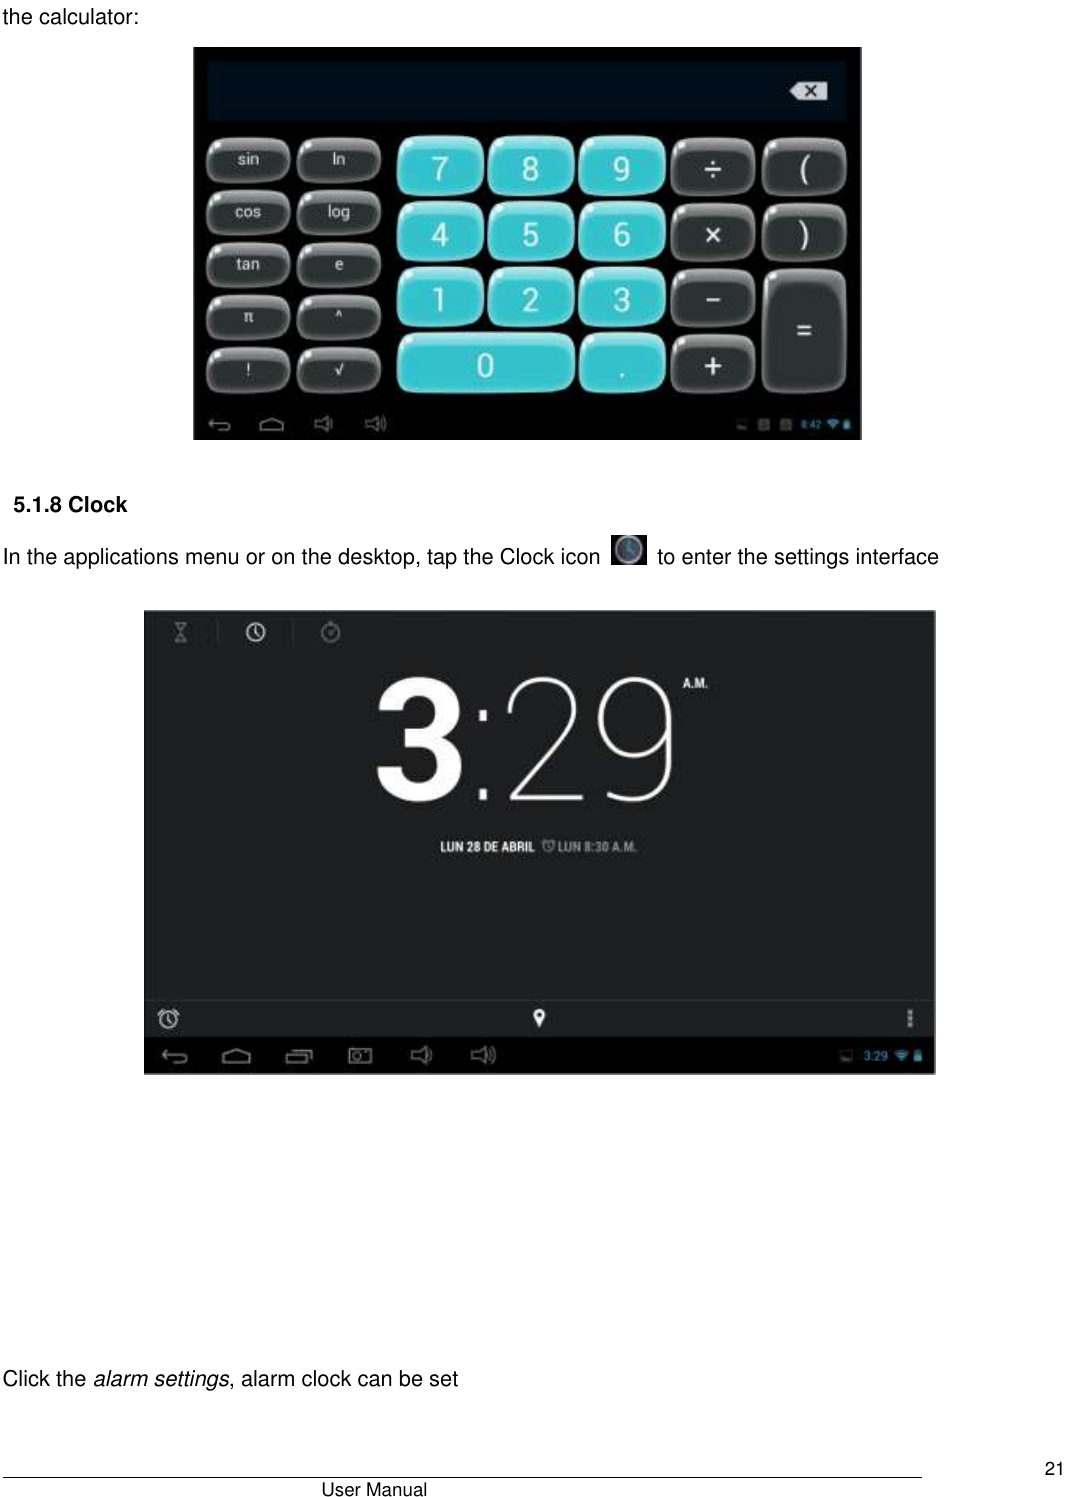                                       User Manual     21 the calculator:   5.1.8 Clock In the applications menu or on the desktop, tap the Clock icon    to enter the settings interface          Click the alarm settings, alarm clock can be set  